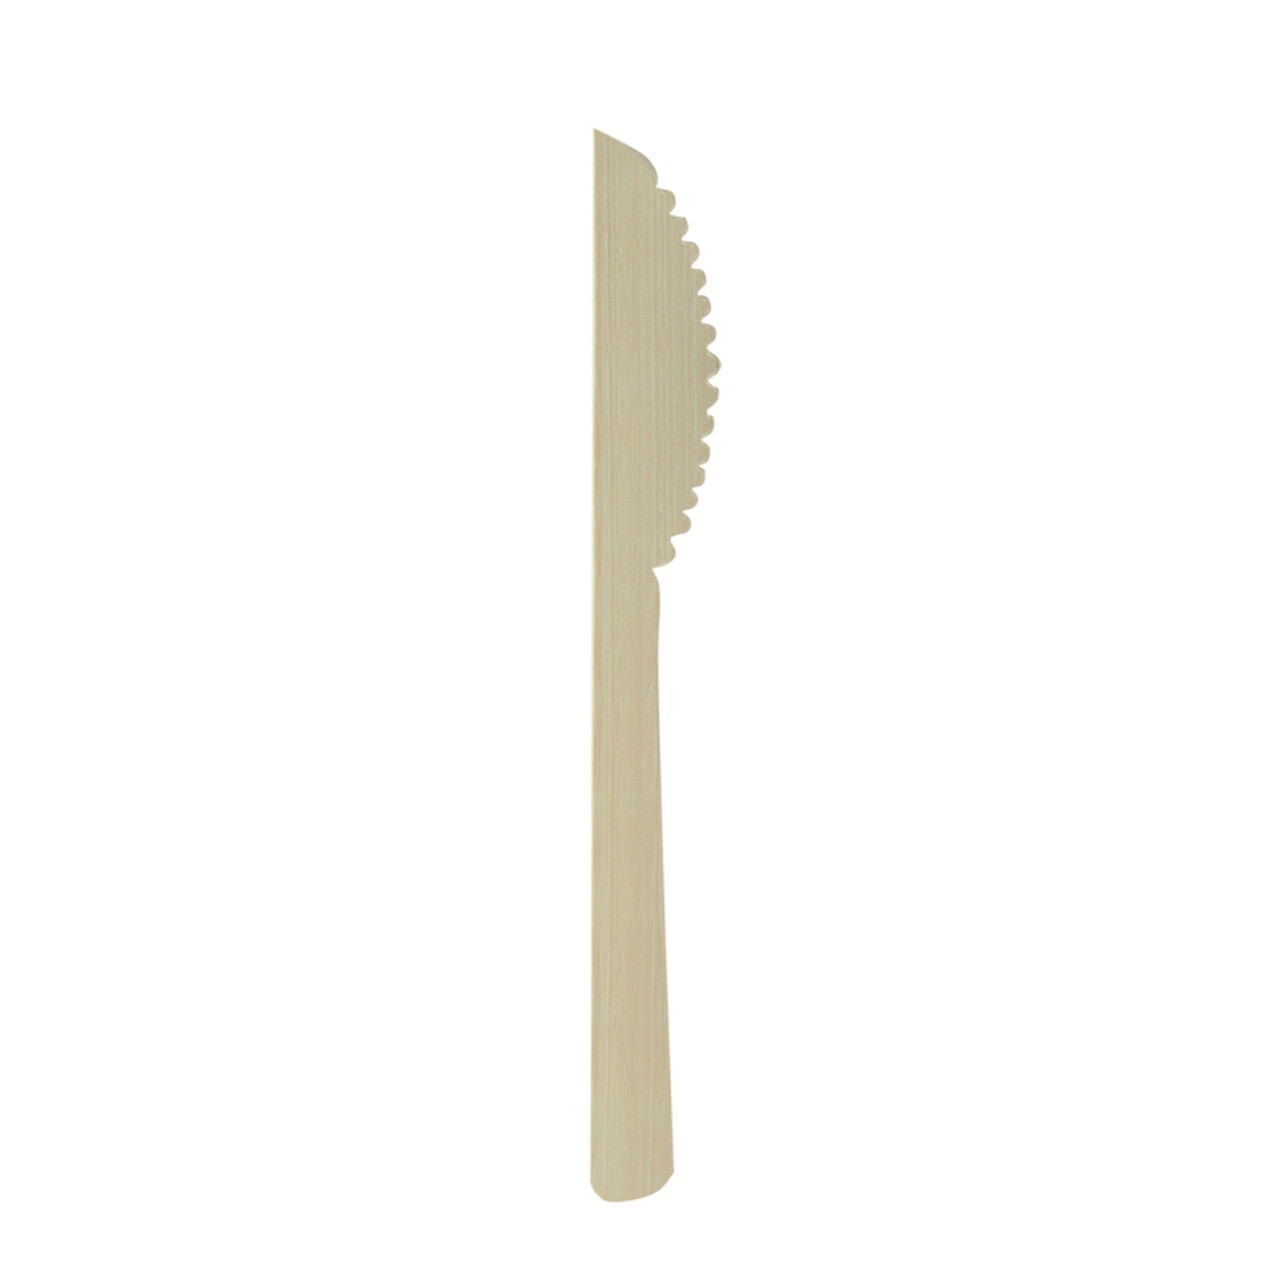 Small Wooden Knife L:5.47in - 100 pcs